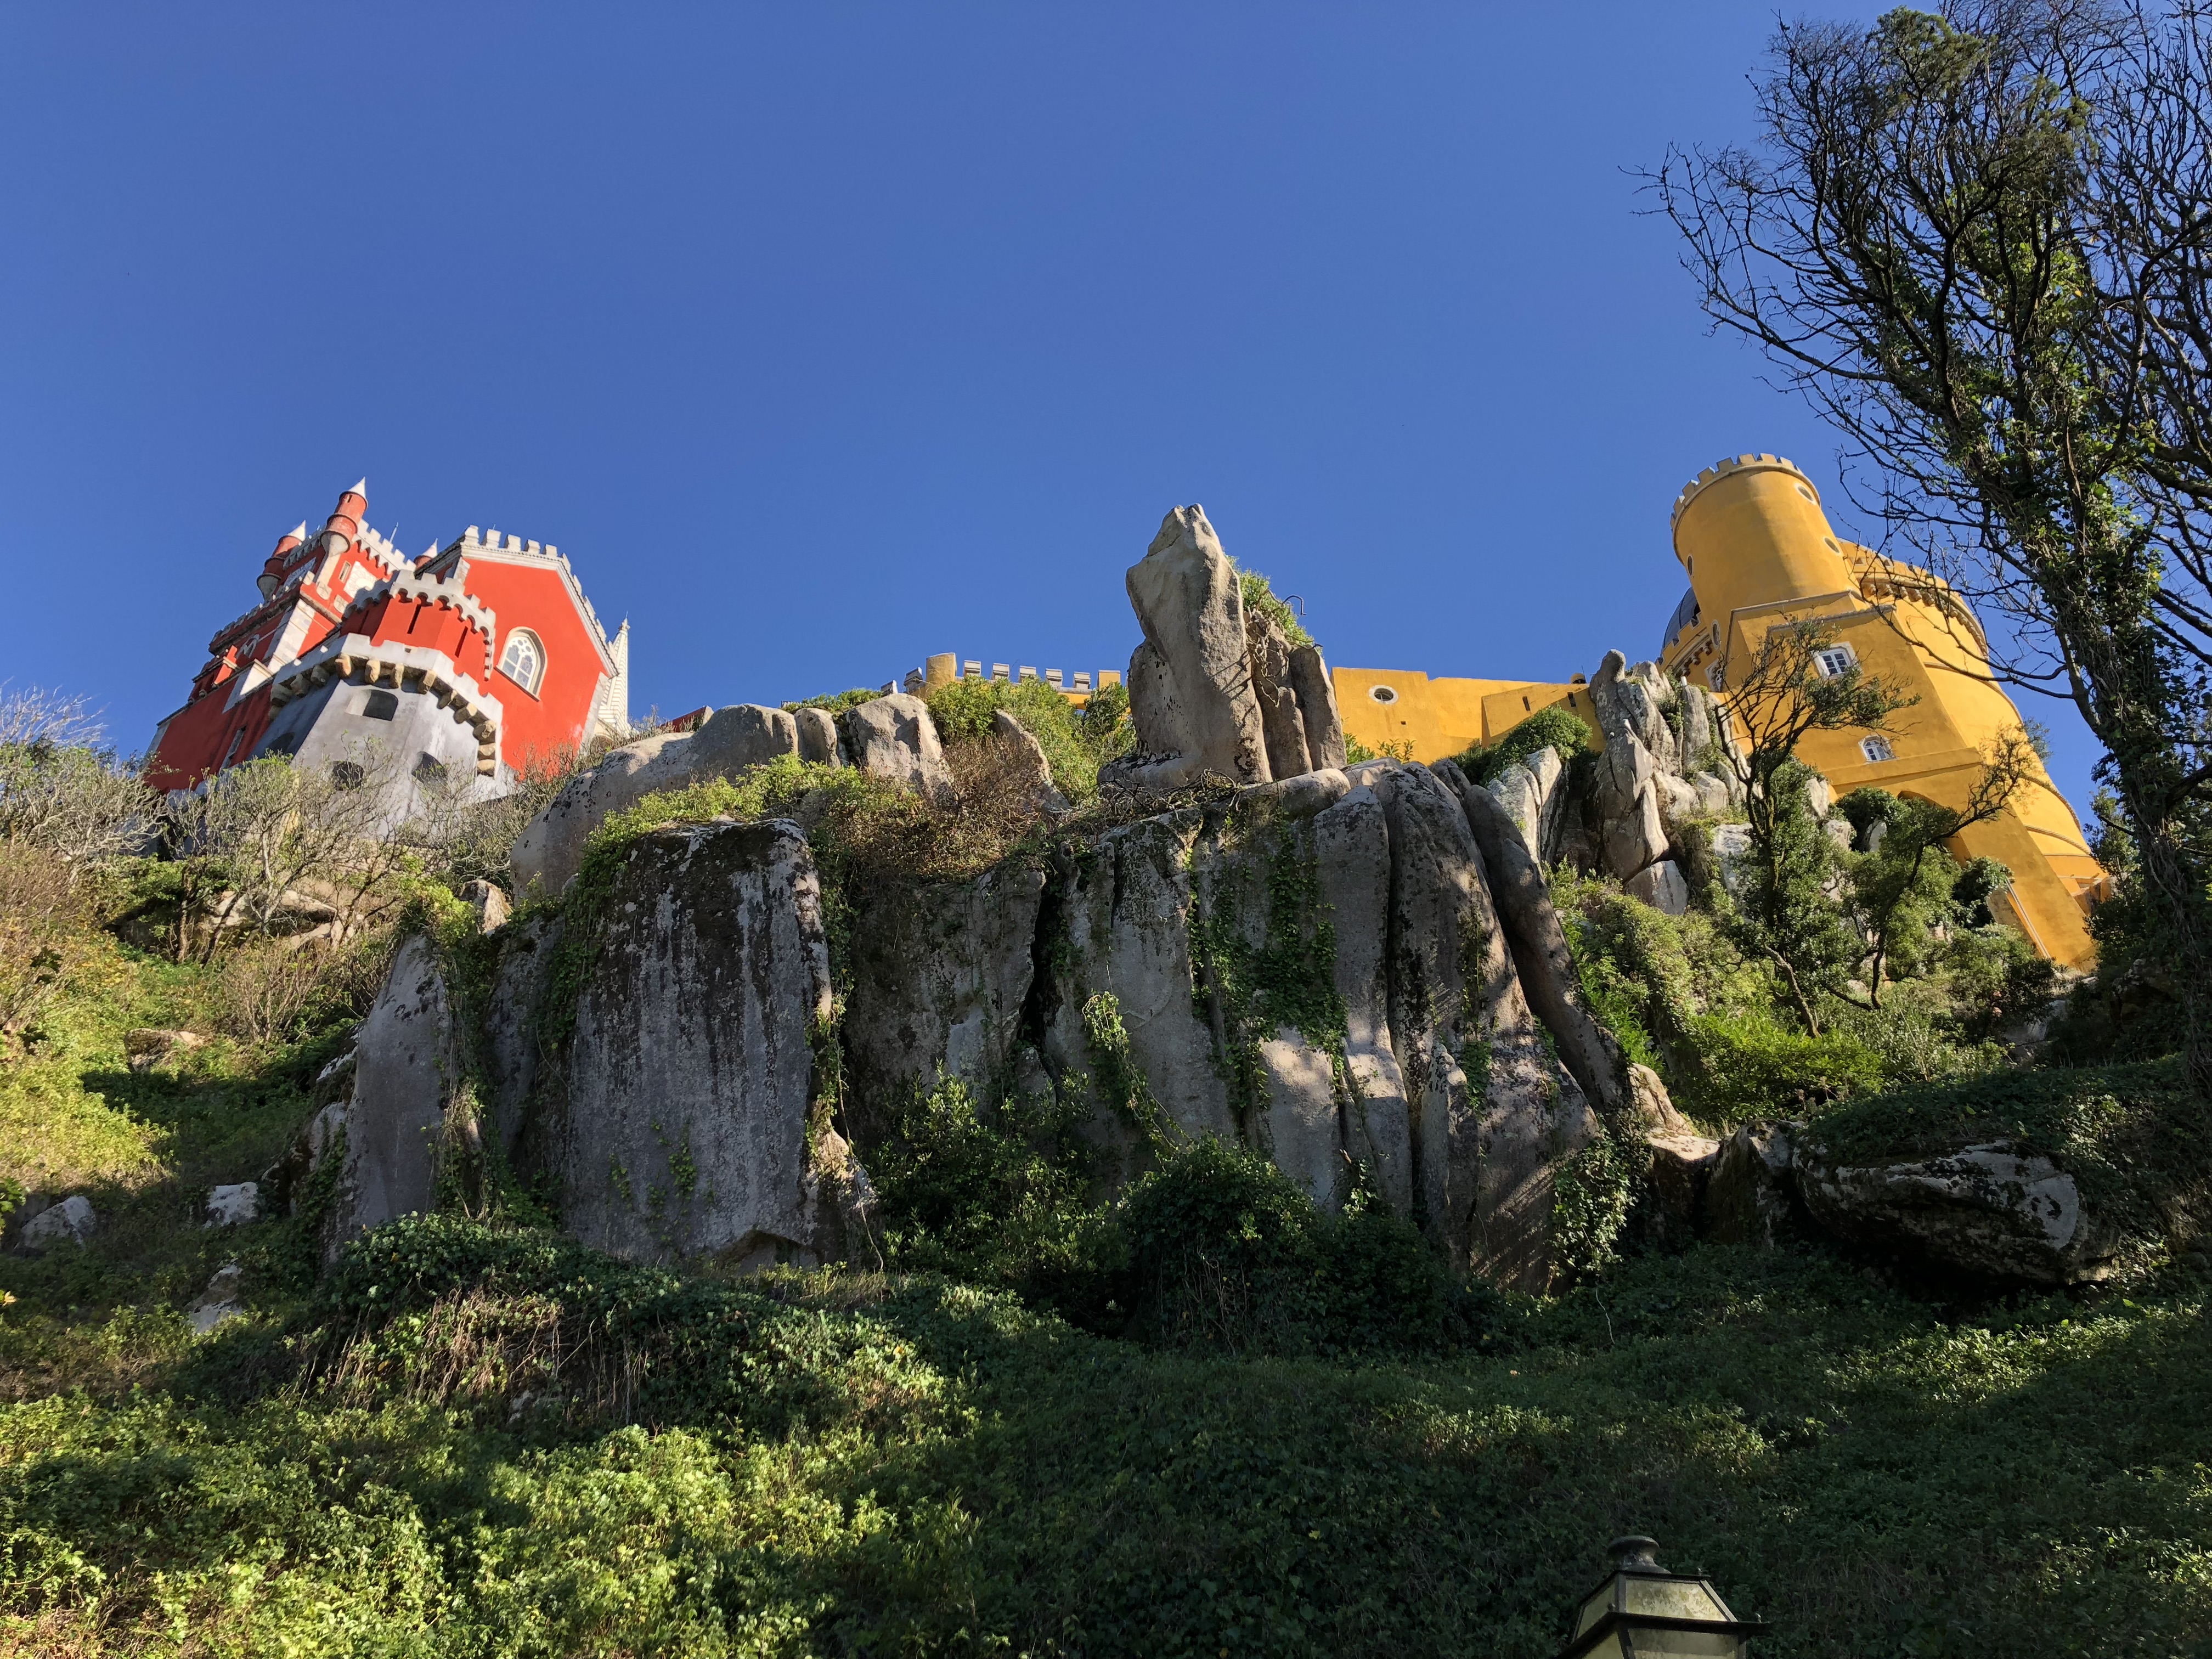 One Day In Sintra